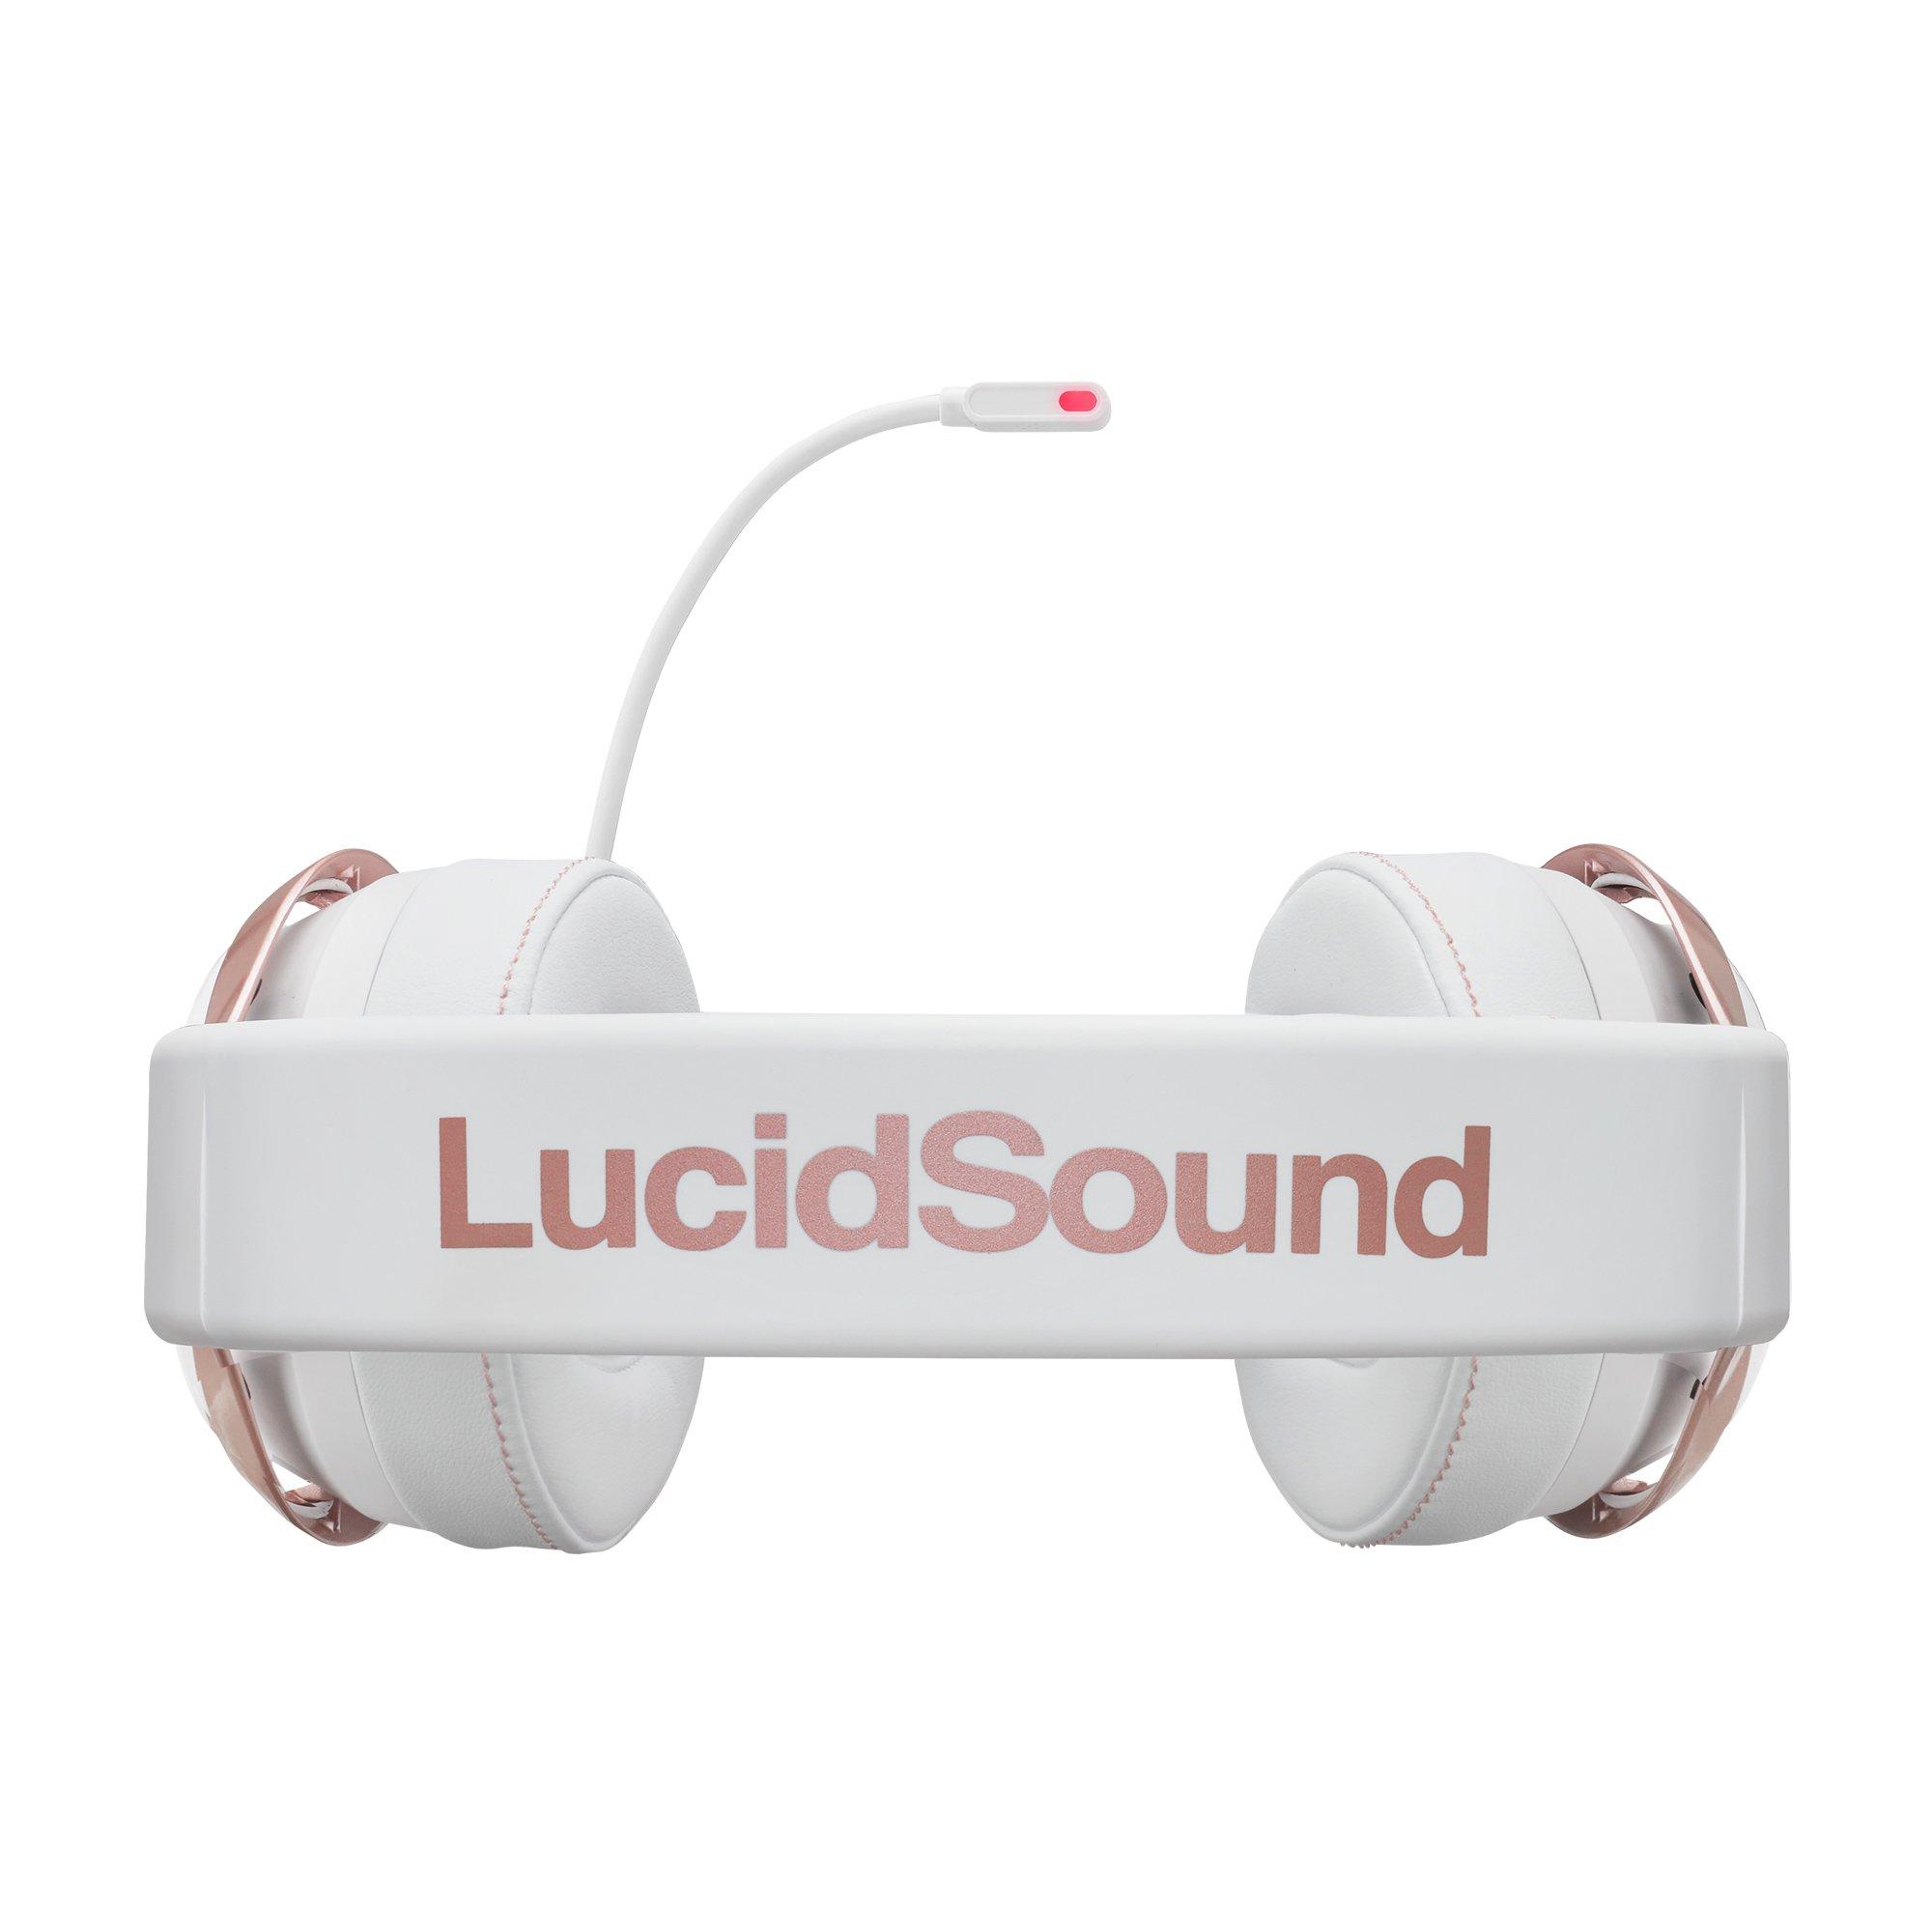 LucidSound LS35X Wireless Surround Sound Stereo Gaming Headset for Xbox  Series X, S, Xbox Series X, S Wireless Headsets